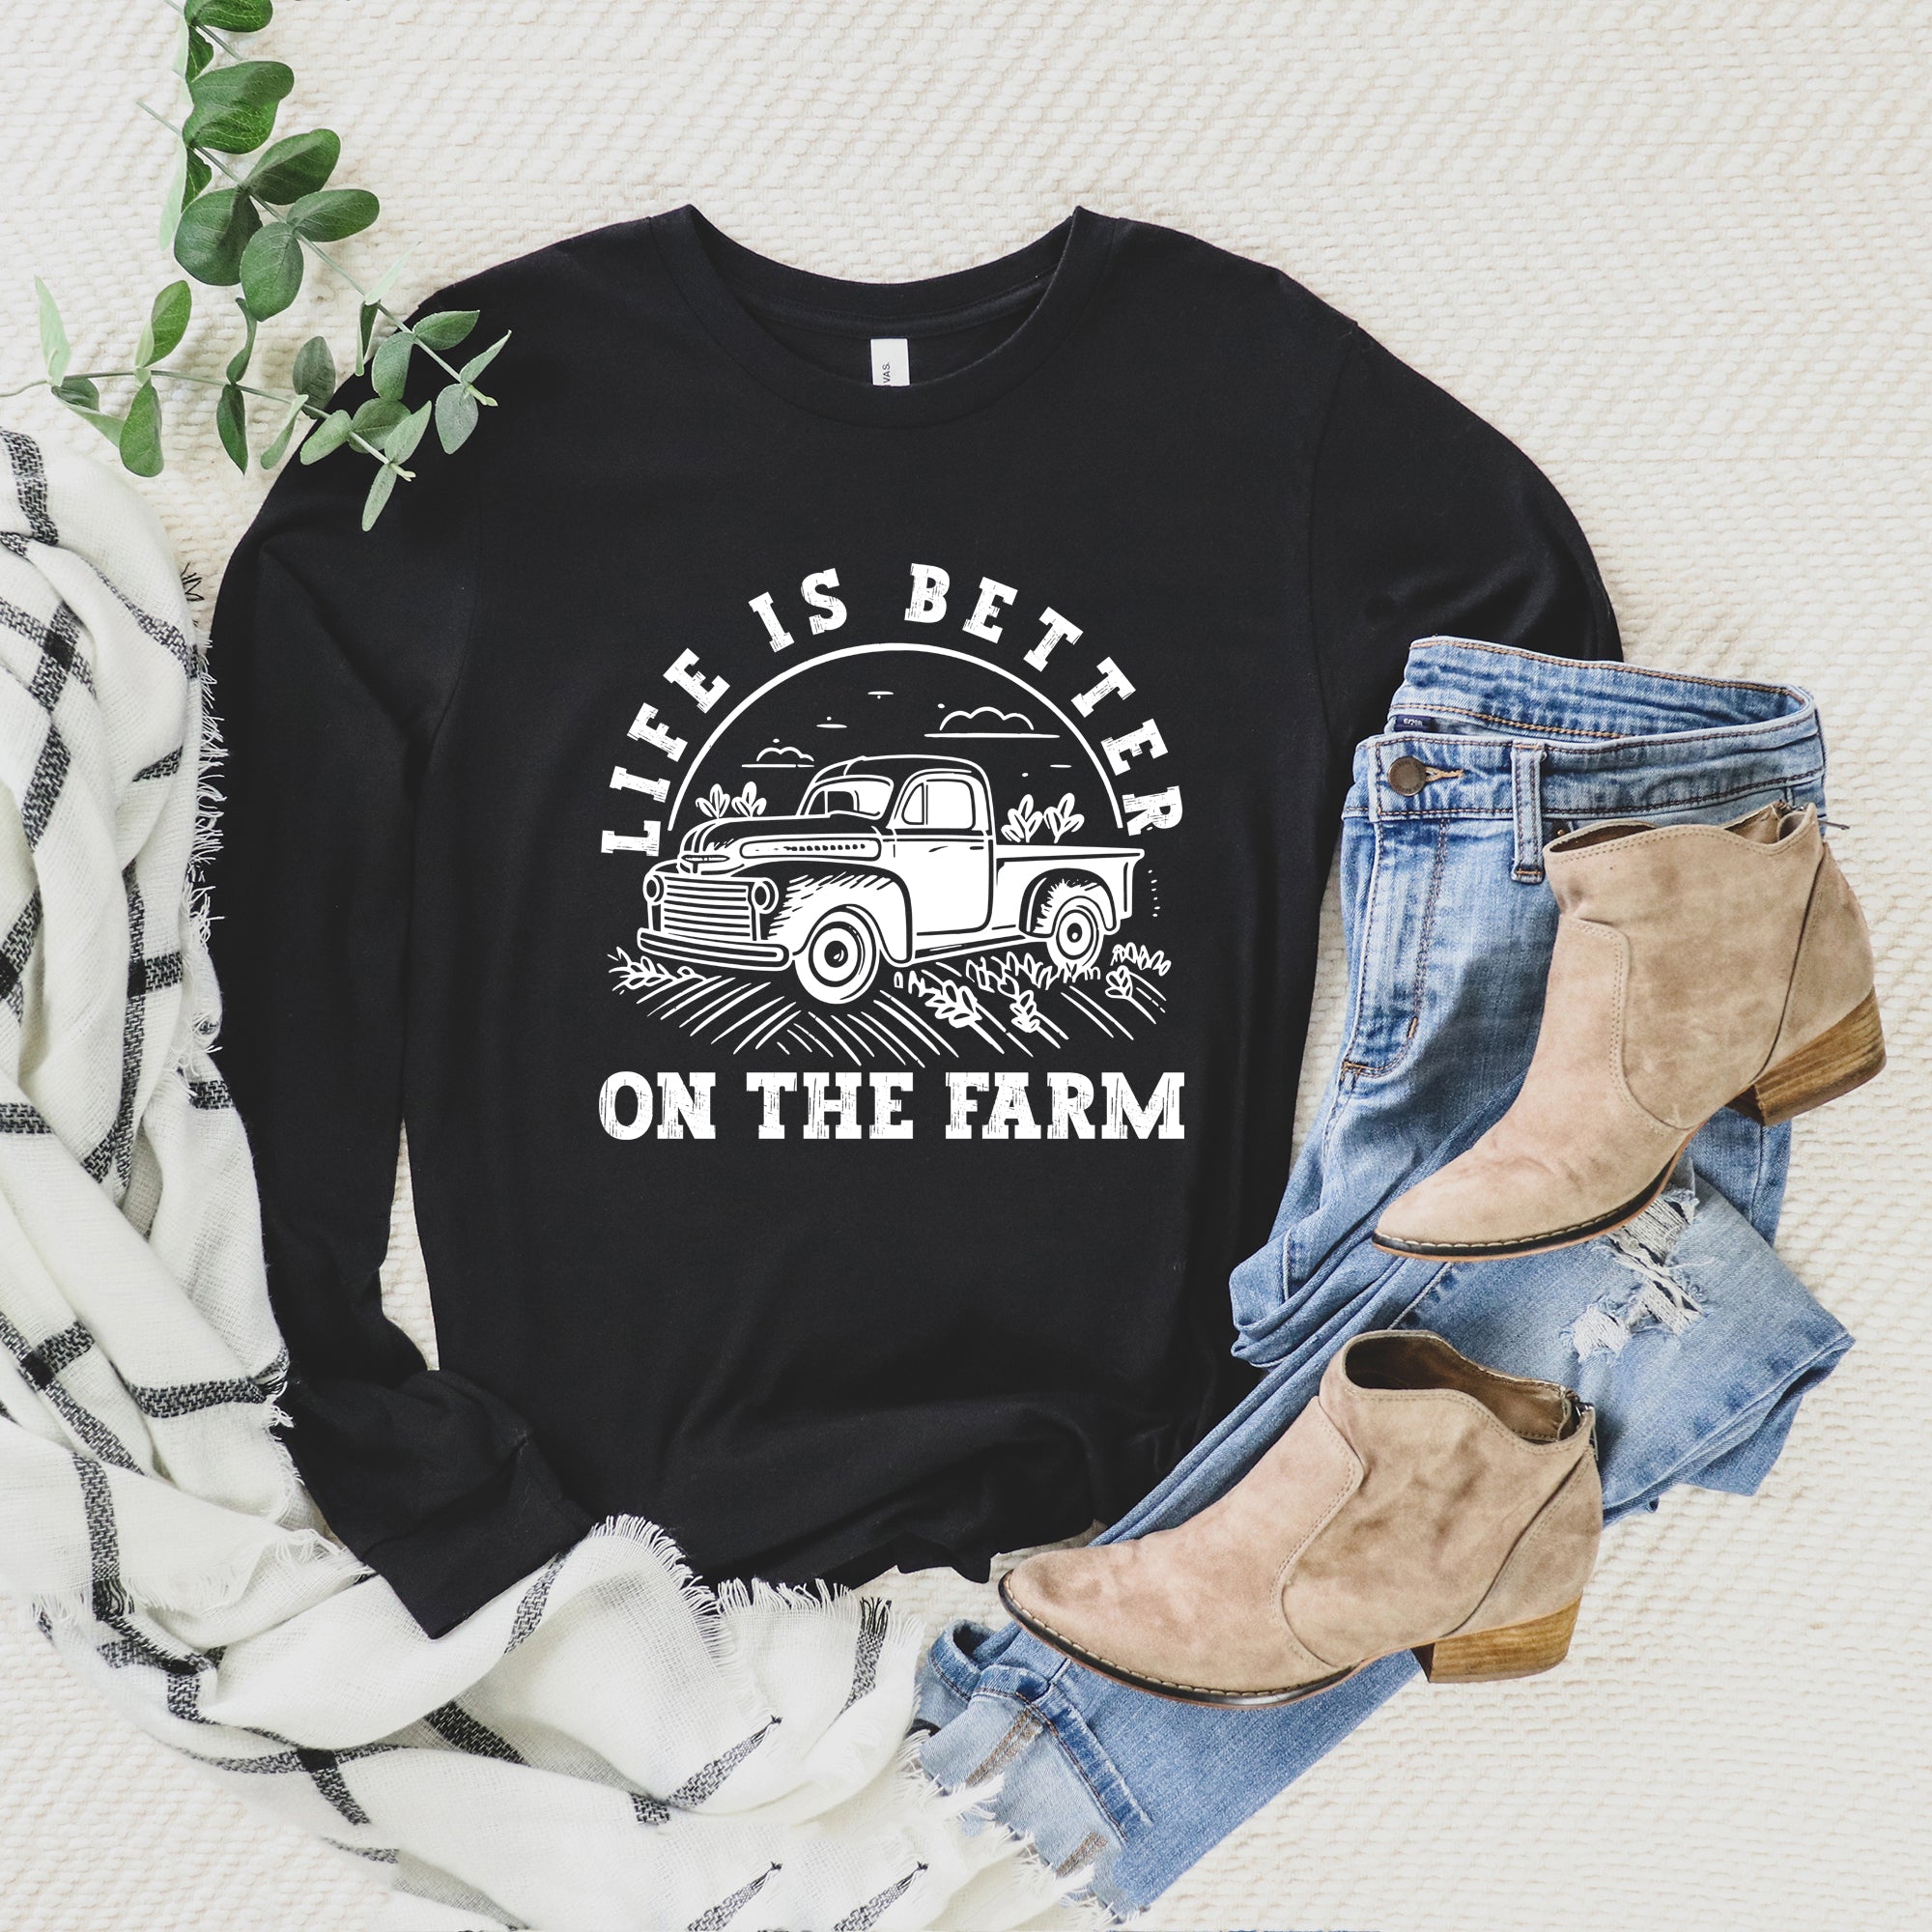 Life Is Better On The Farm T-Shirt